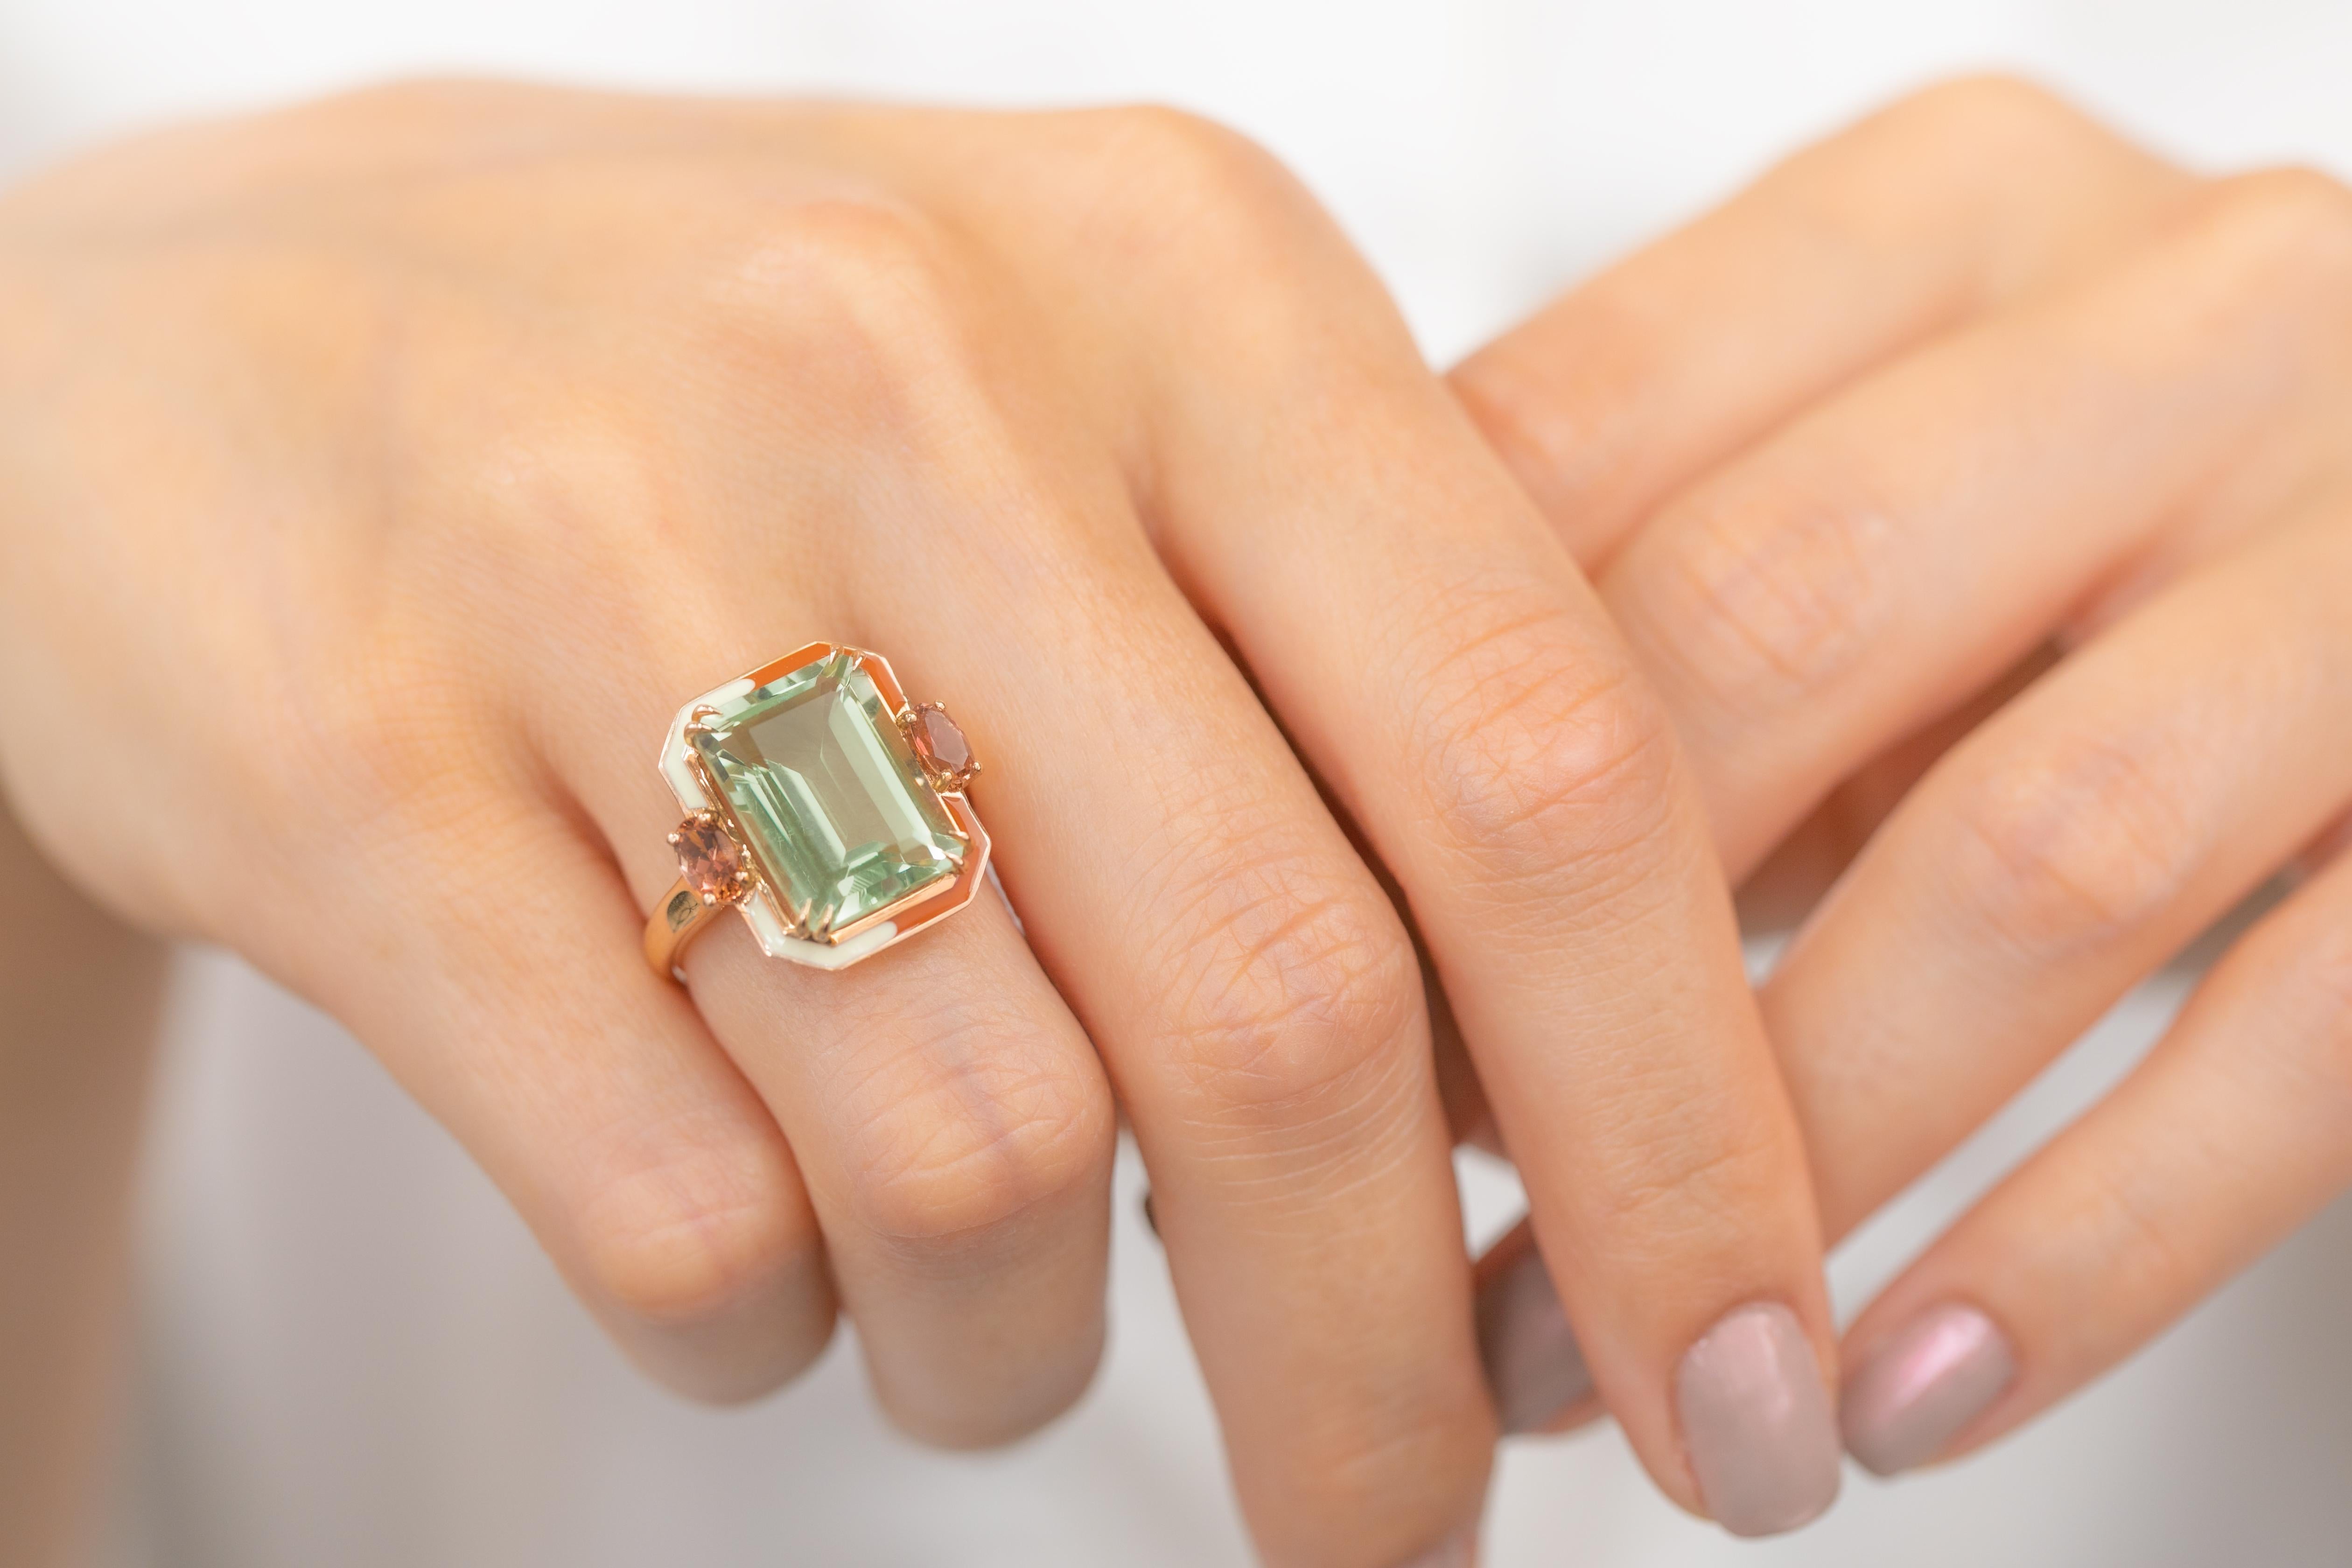 For Sale:  Artdeco Style Ring, 14k Solid Gold, Green Amethyst and Pink Tourmaline Stone Ring 10